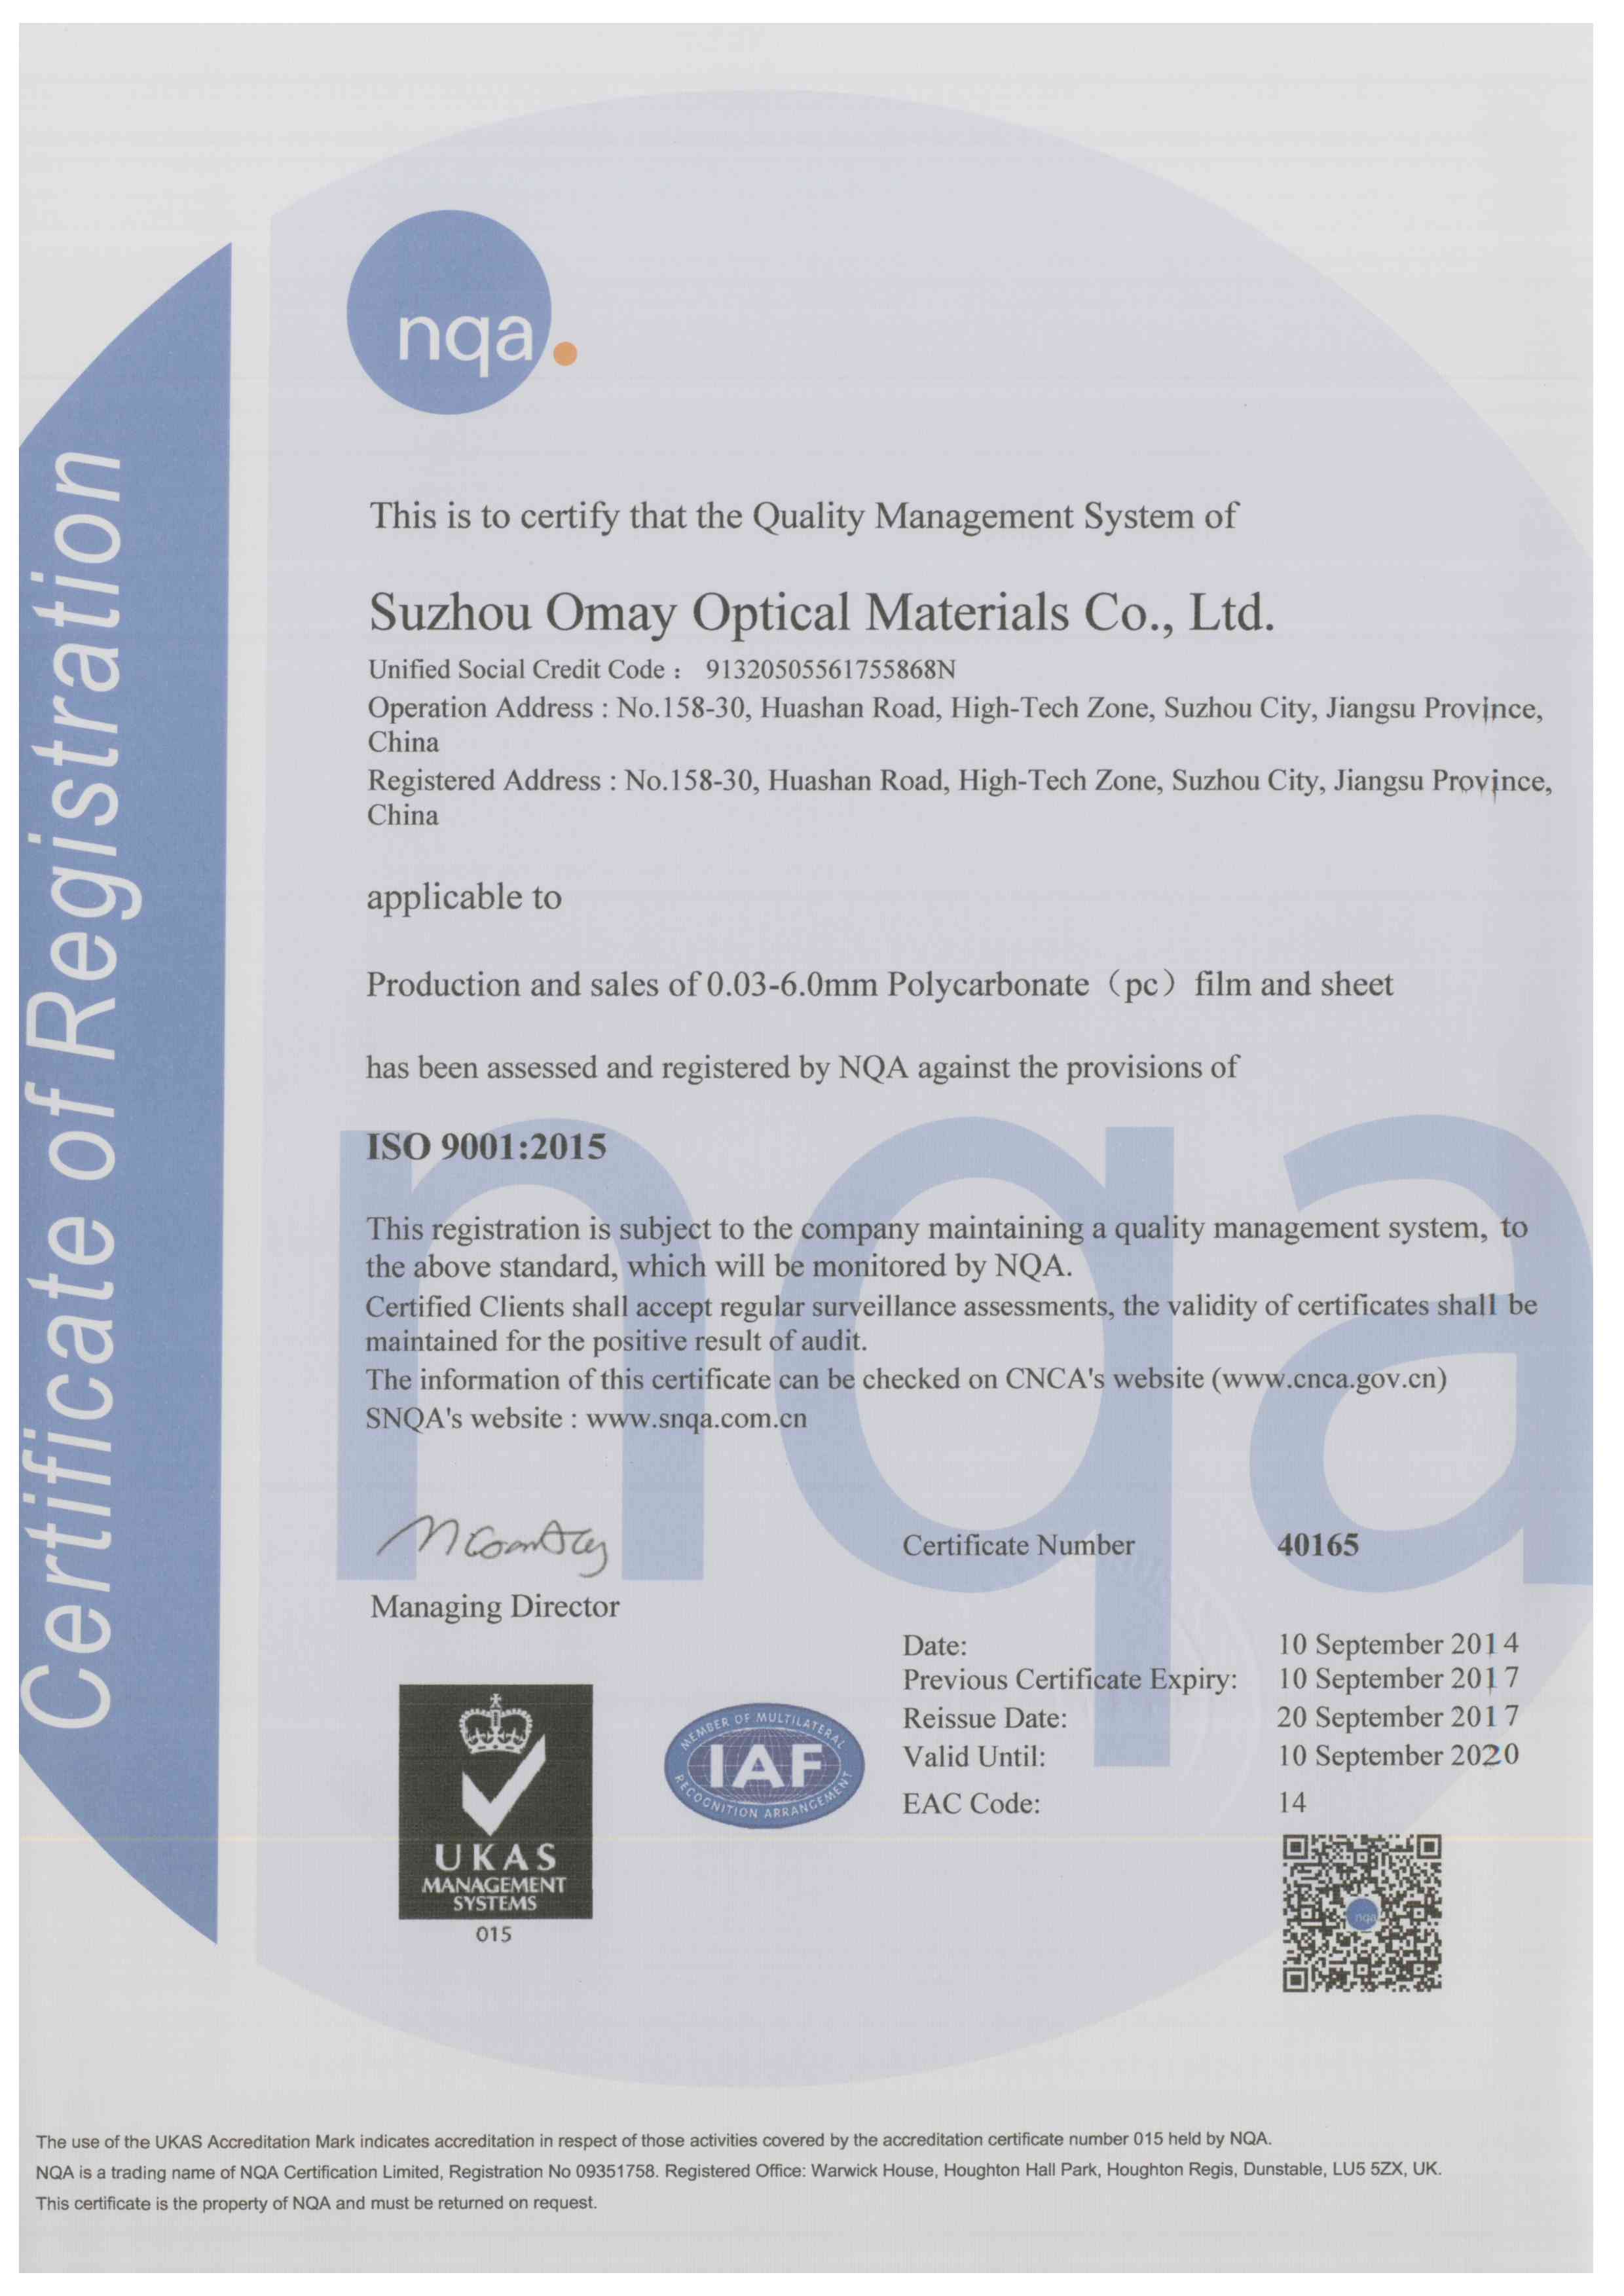 Omay got approved by ISO2015 Certification